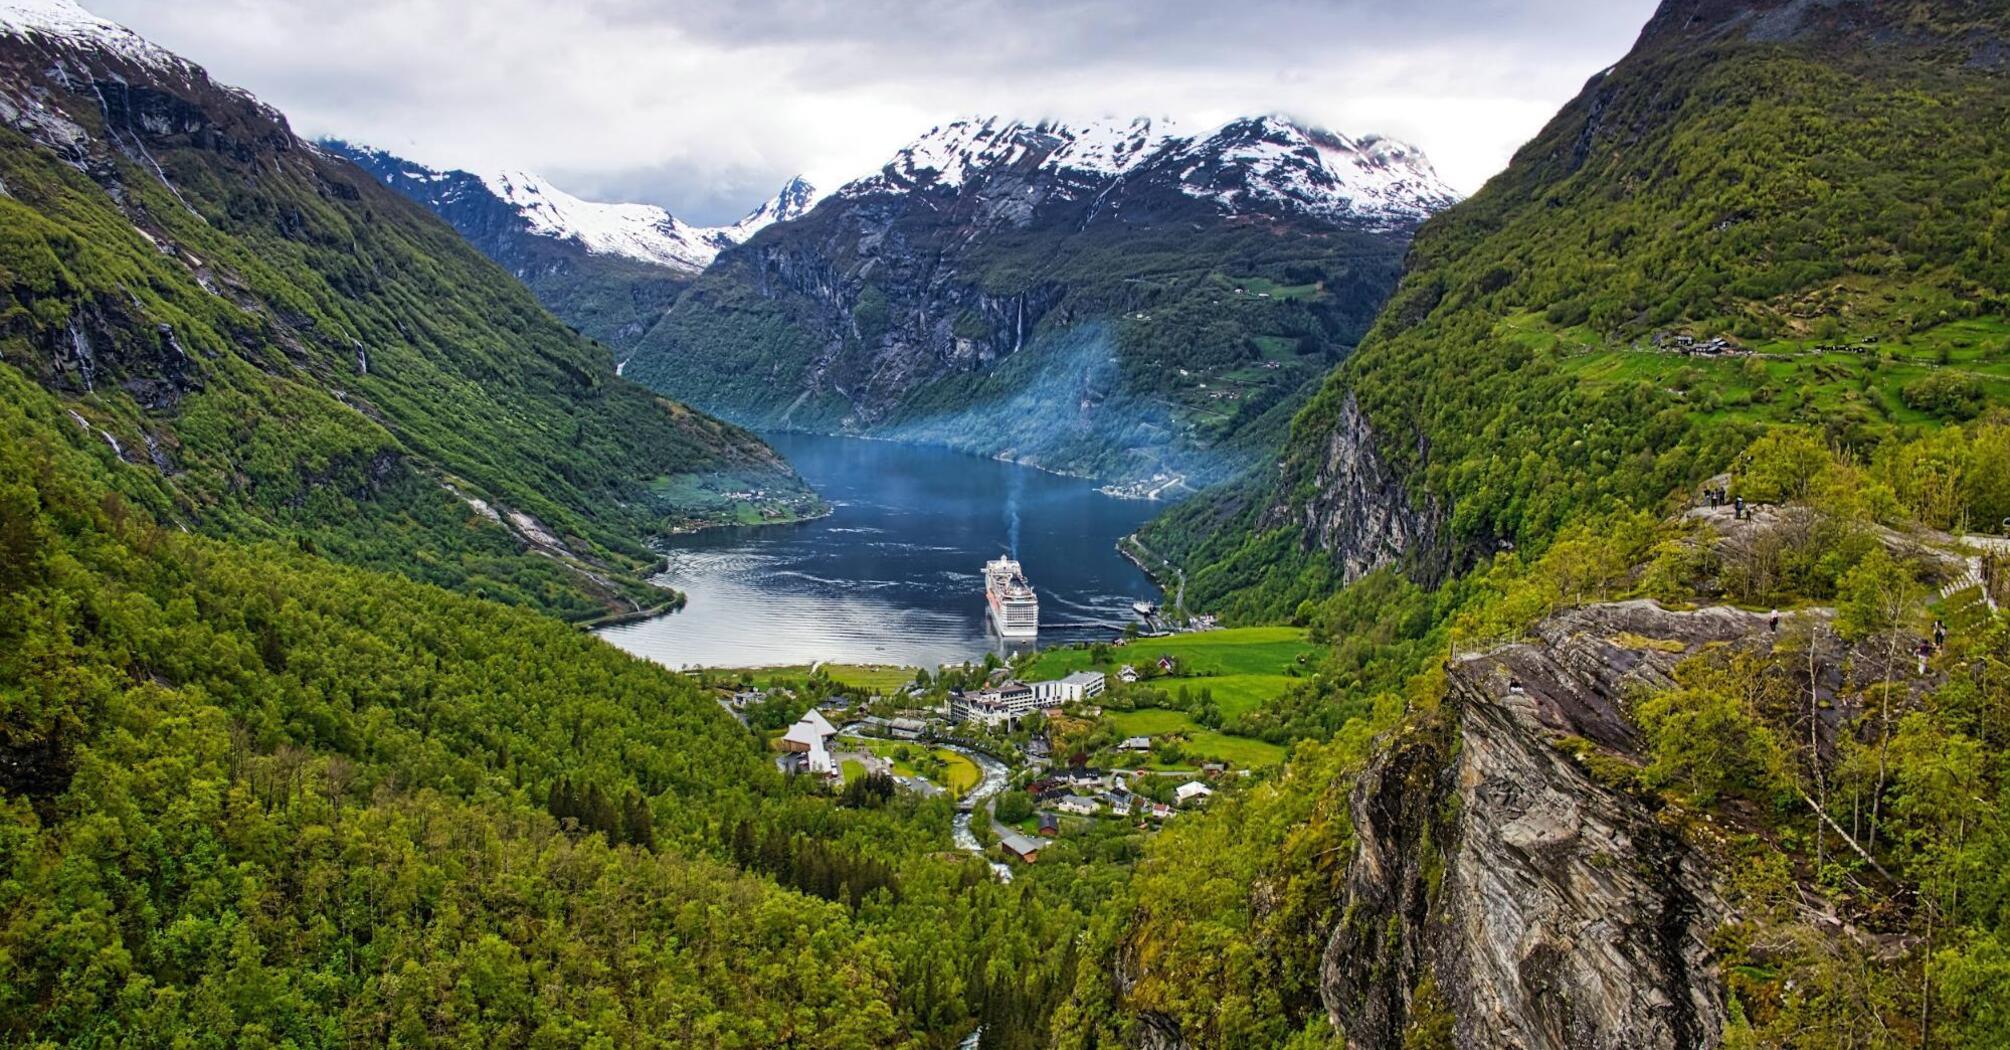 Cruise ship in a fjord surrounded by green and snowy mountains